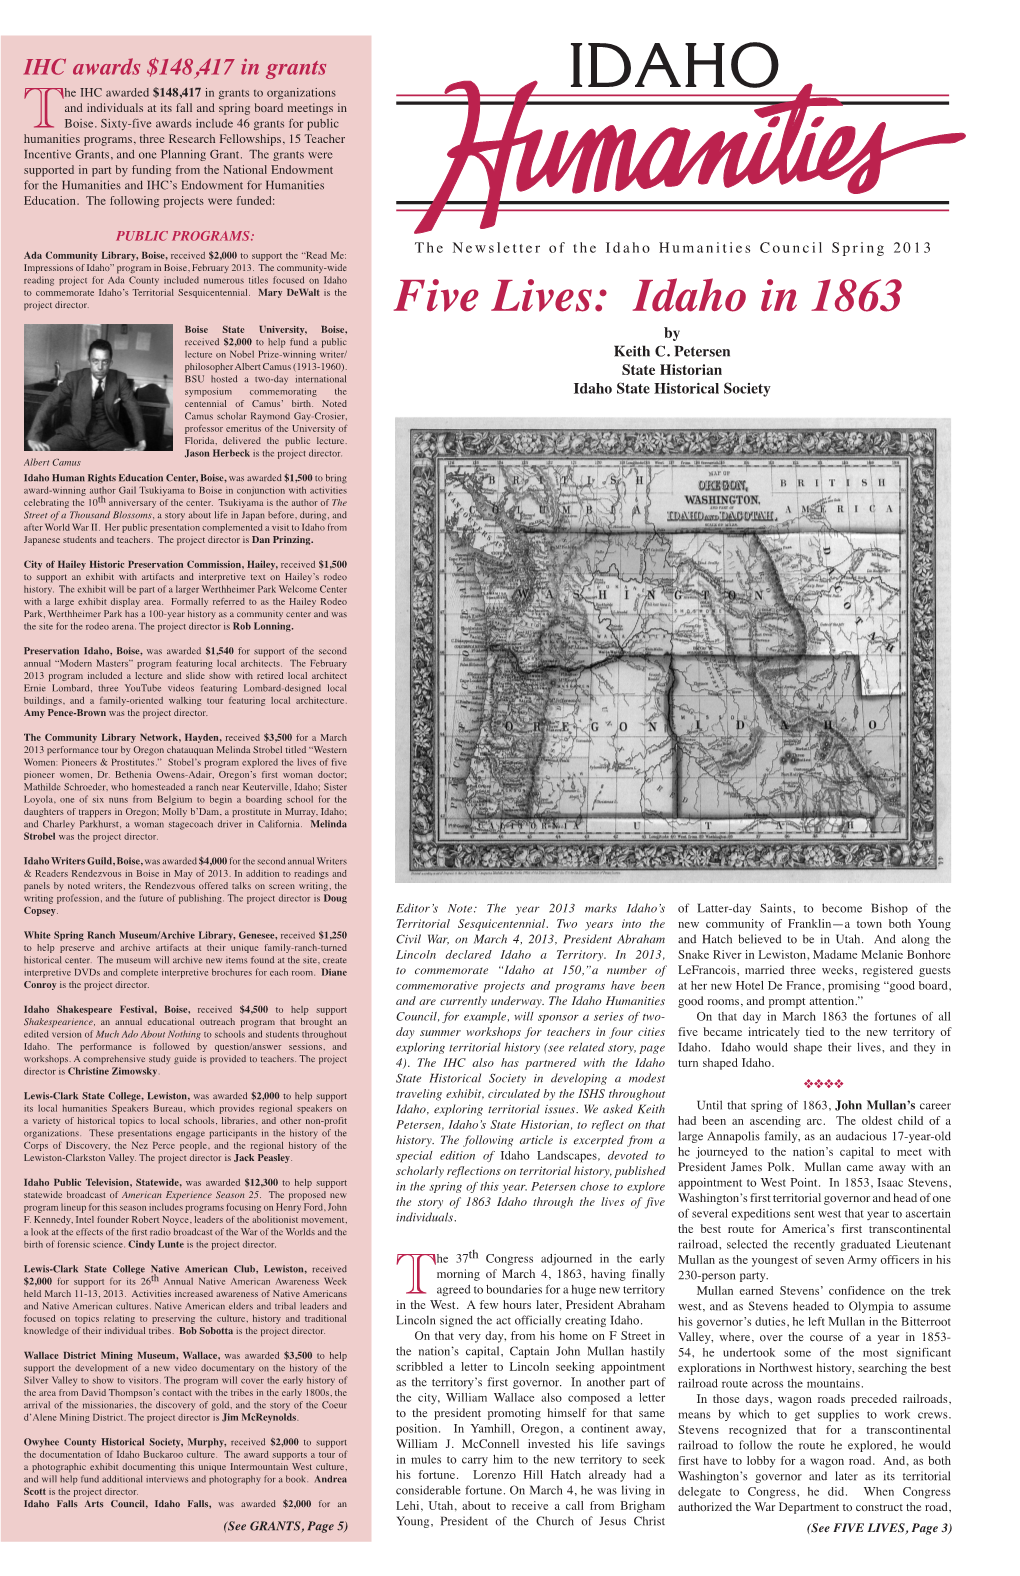 Five Lives: Idaho in 1863 Boise State University, Boise, by Received $2,000 to Help Fund a Public Lecture on Nobel Prize-Winning Writer/ Keith C